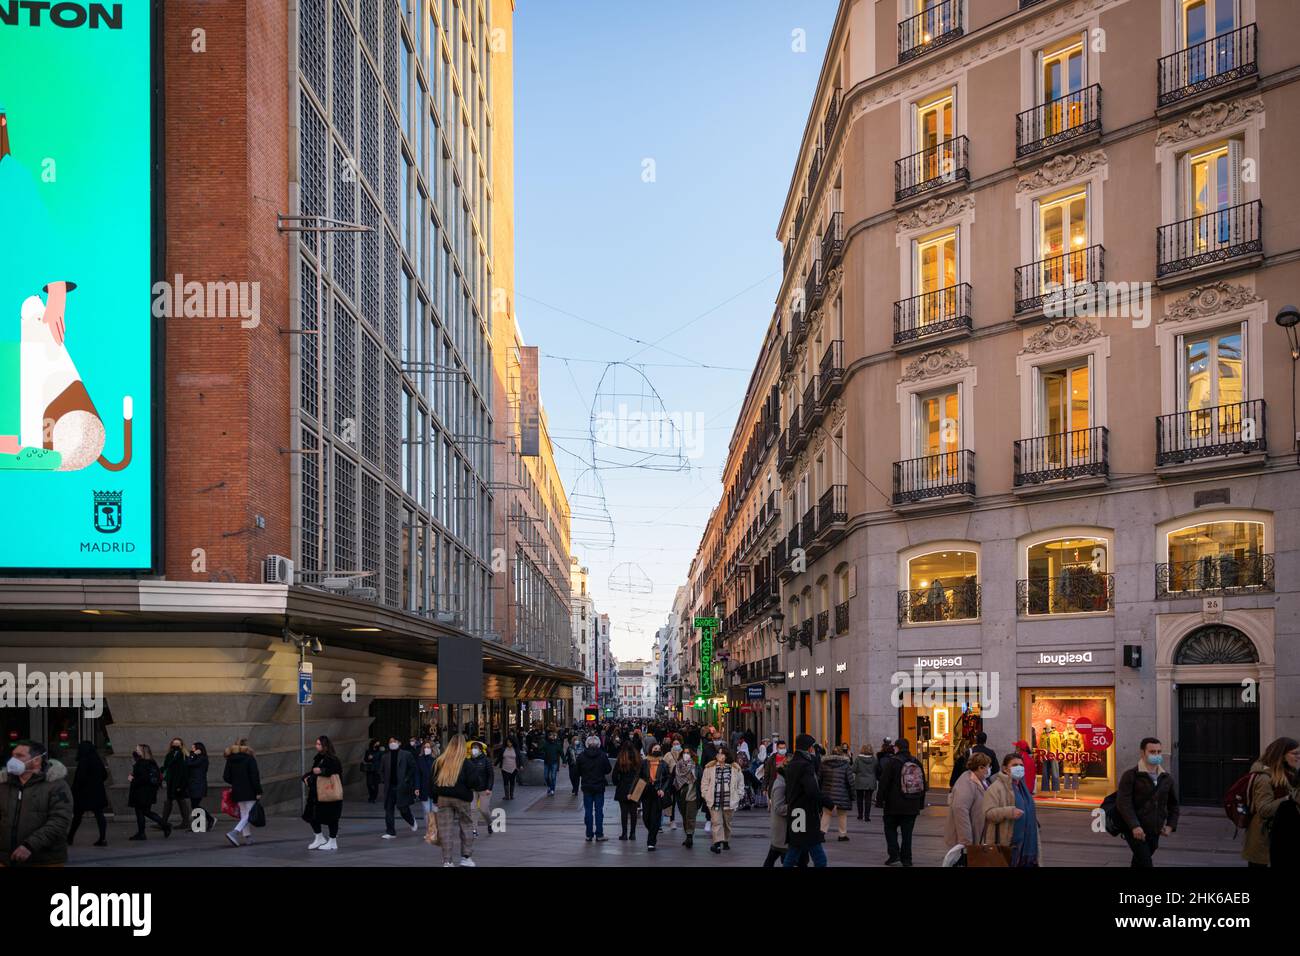 The beautiful architecture in downtown Madrid Stock Photo